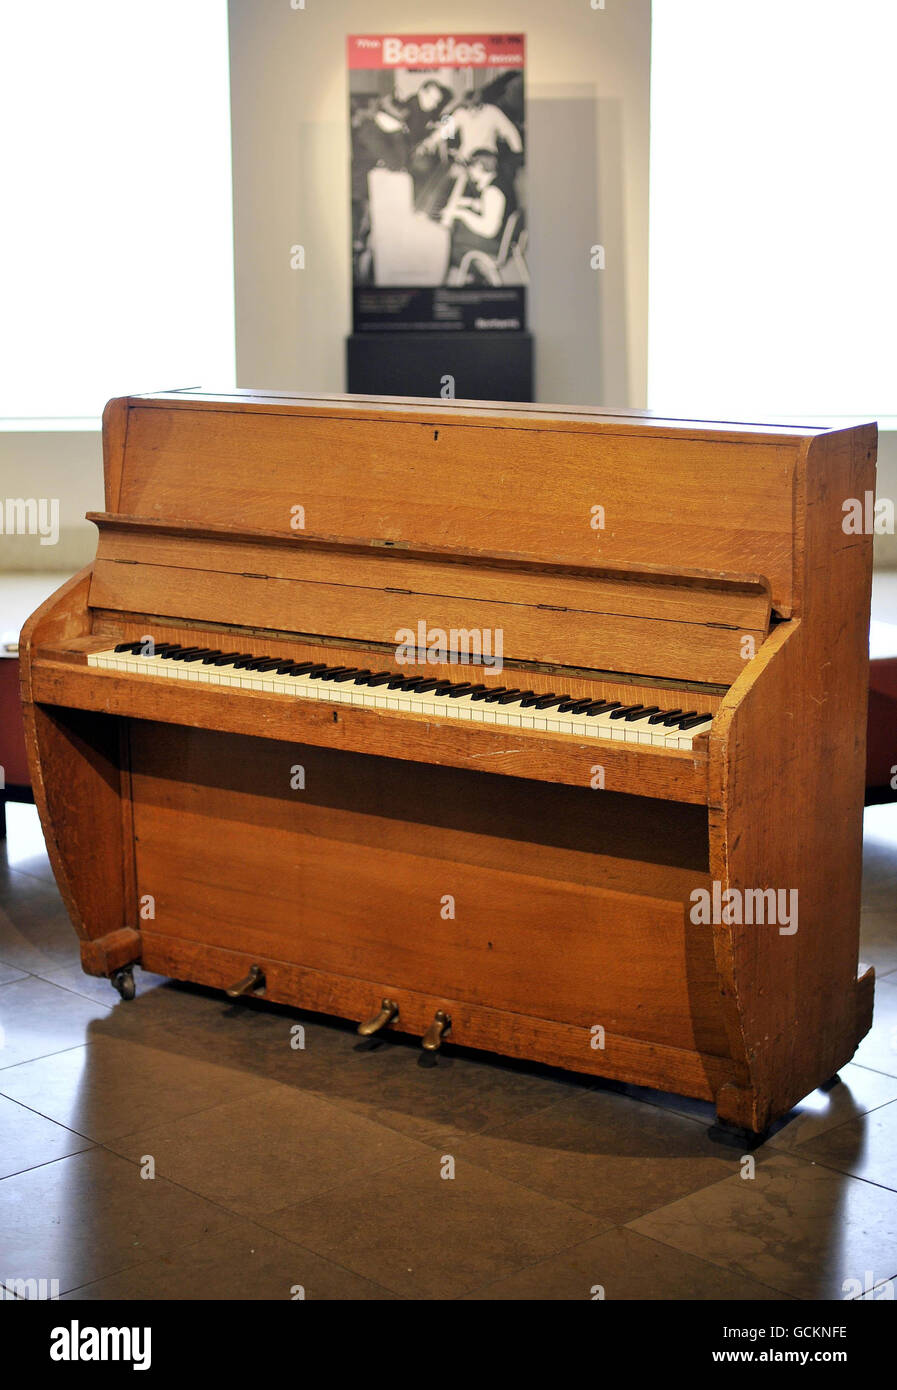 The Challen upright piano from Abbey Road Studios, played by the Beatles and Pink Floyd, at the auction house in London, which is expected to fetch 100,000 to 150,000 when it goes under the hammer on August 15. Stock Photo